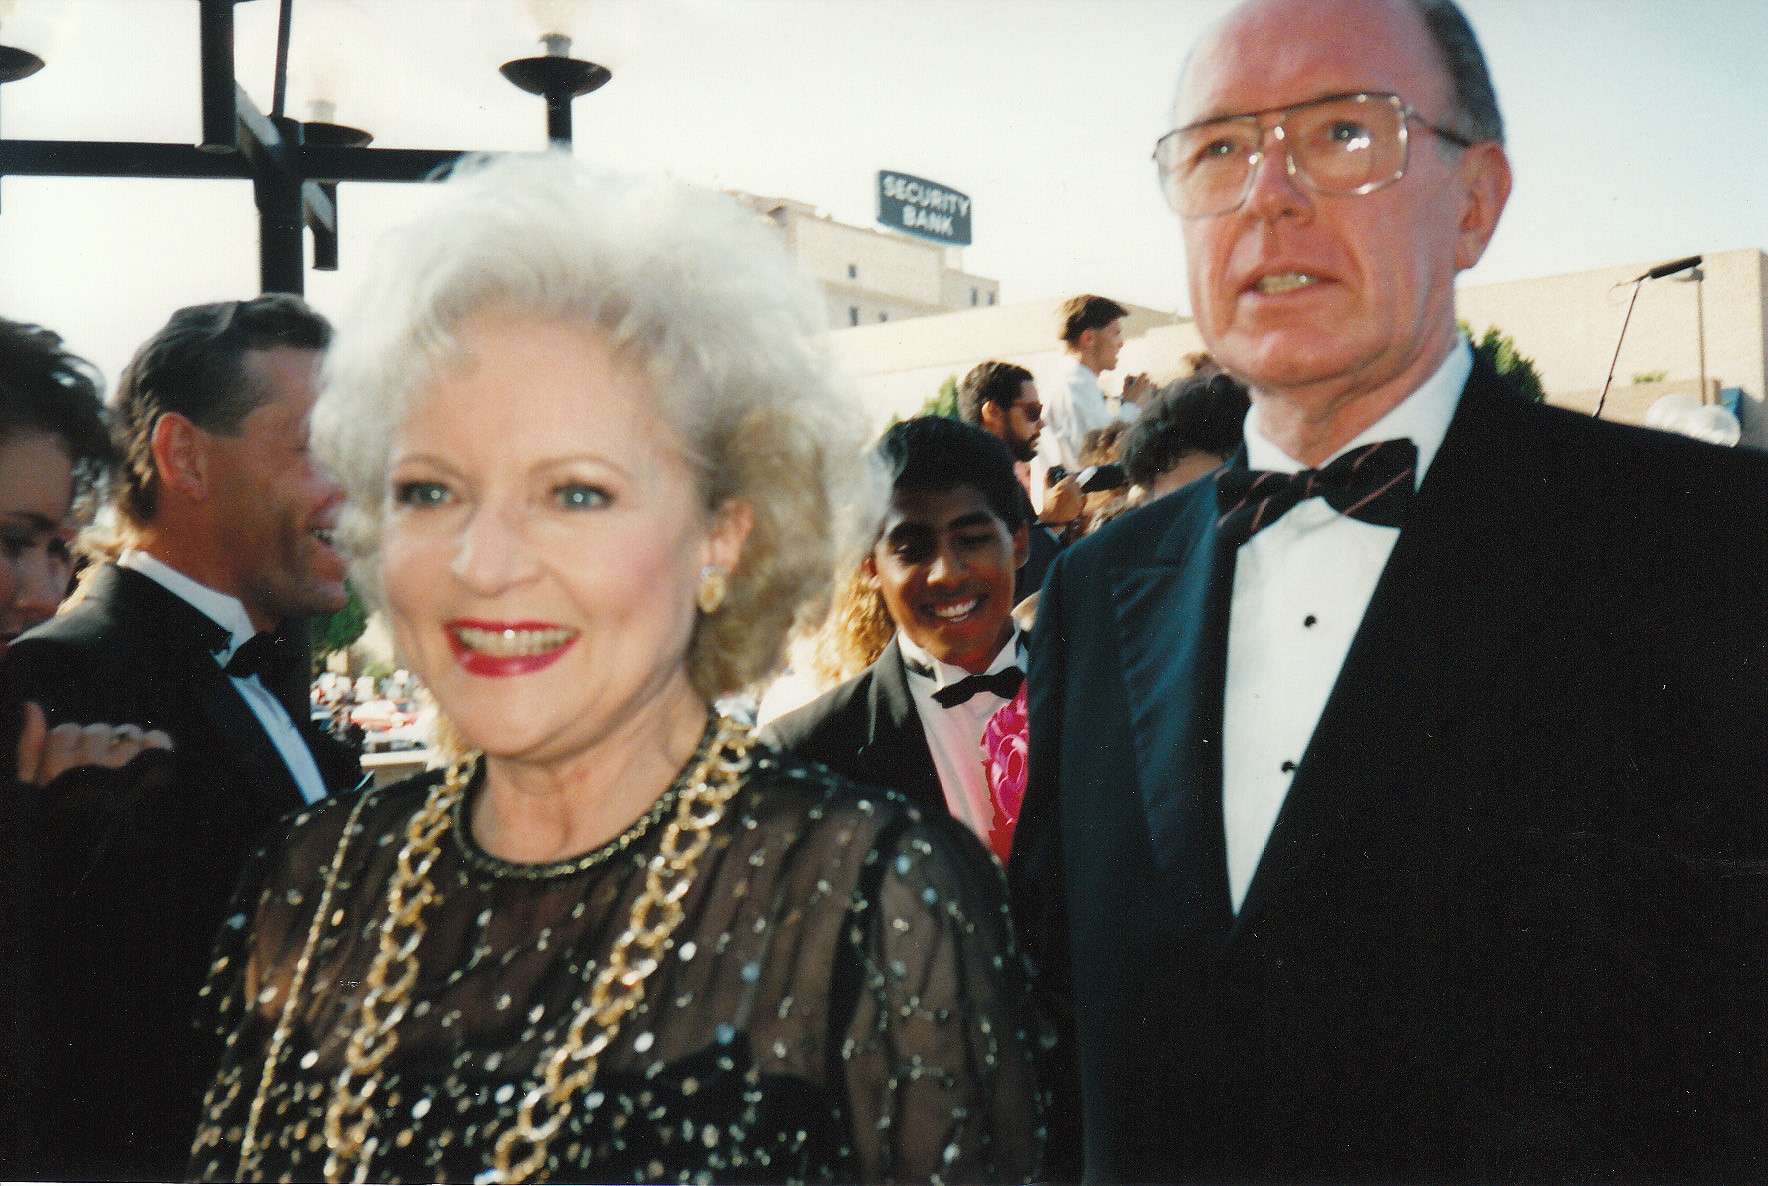 a man and woman dressed in formal wear posing together